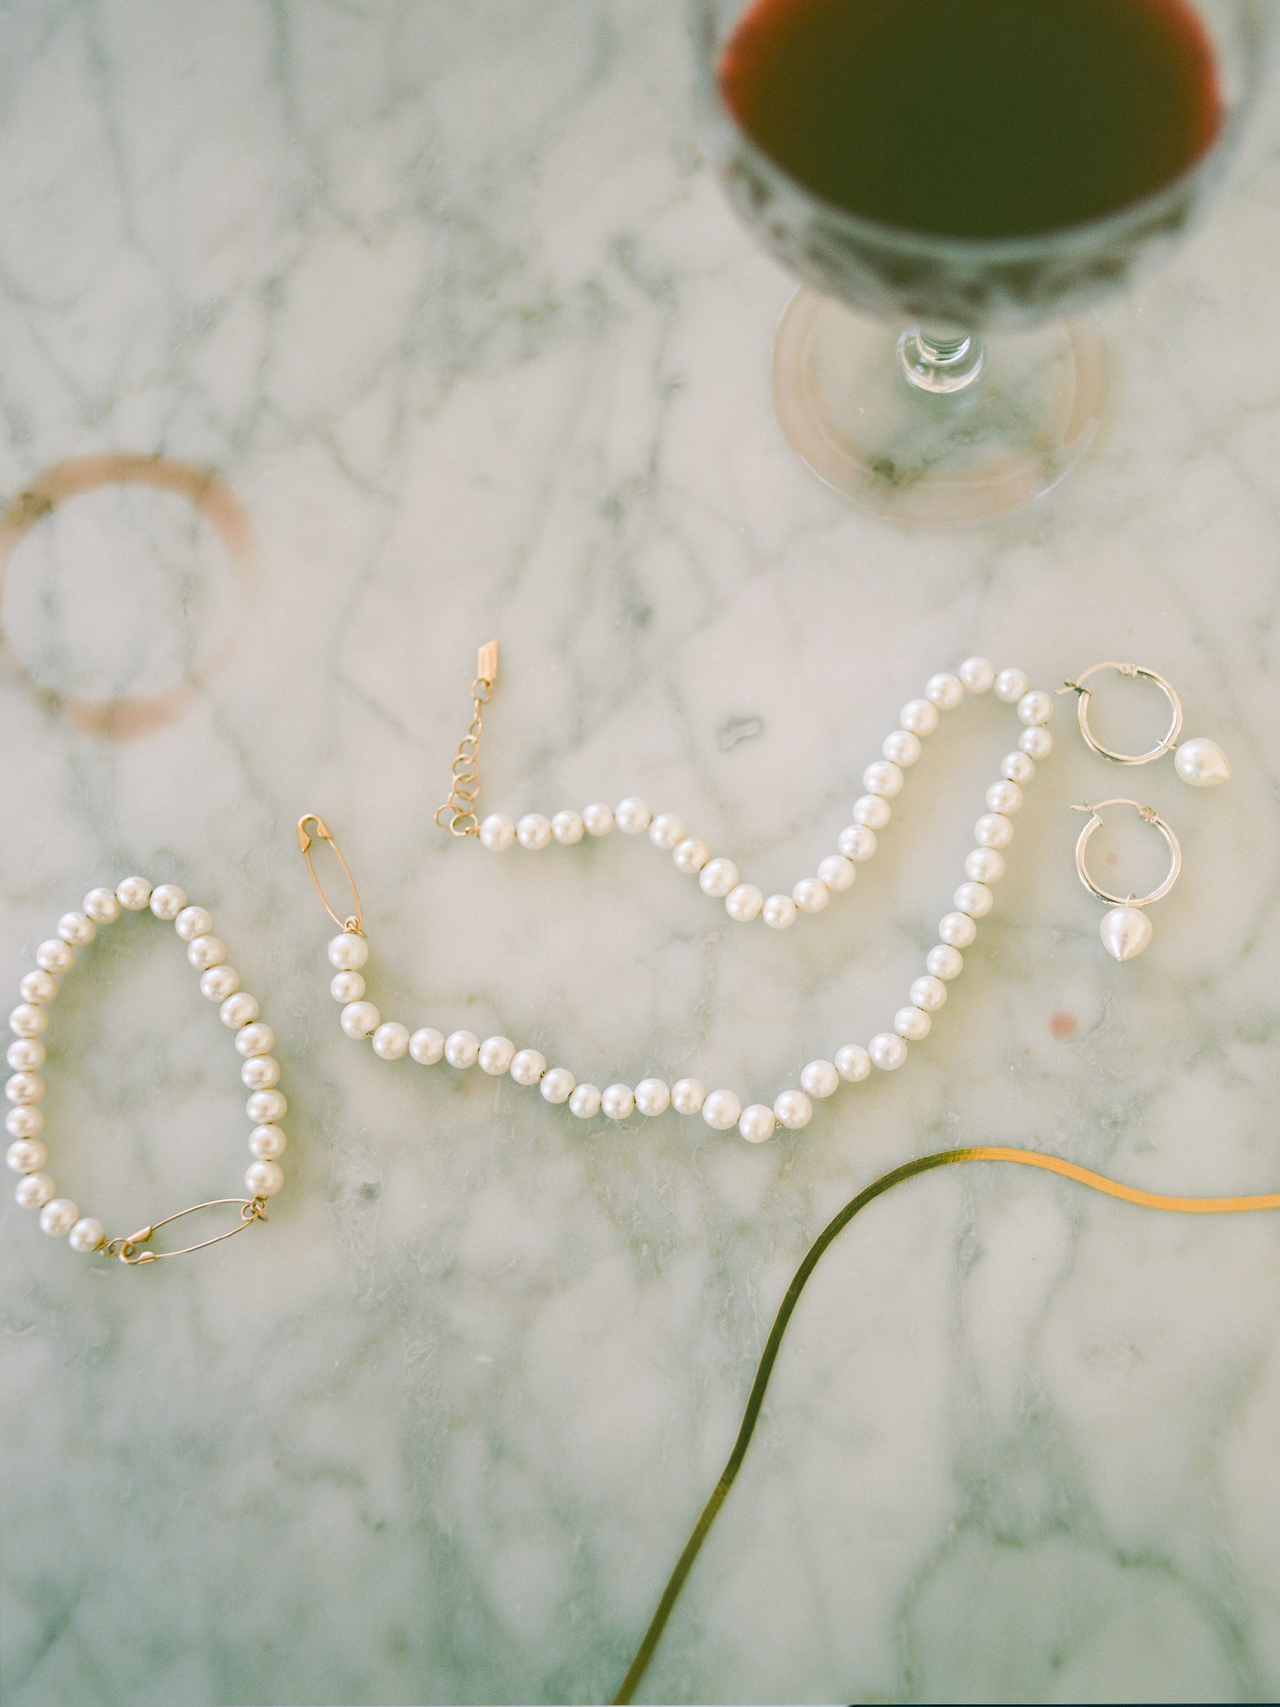 Flat lay imagery of pearl safety pin bracelet on marble backdrop